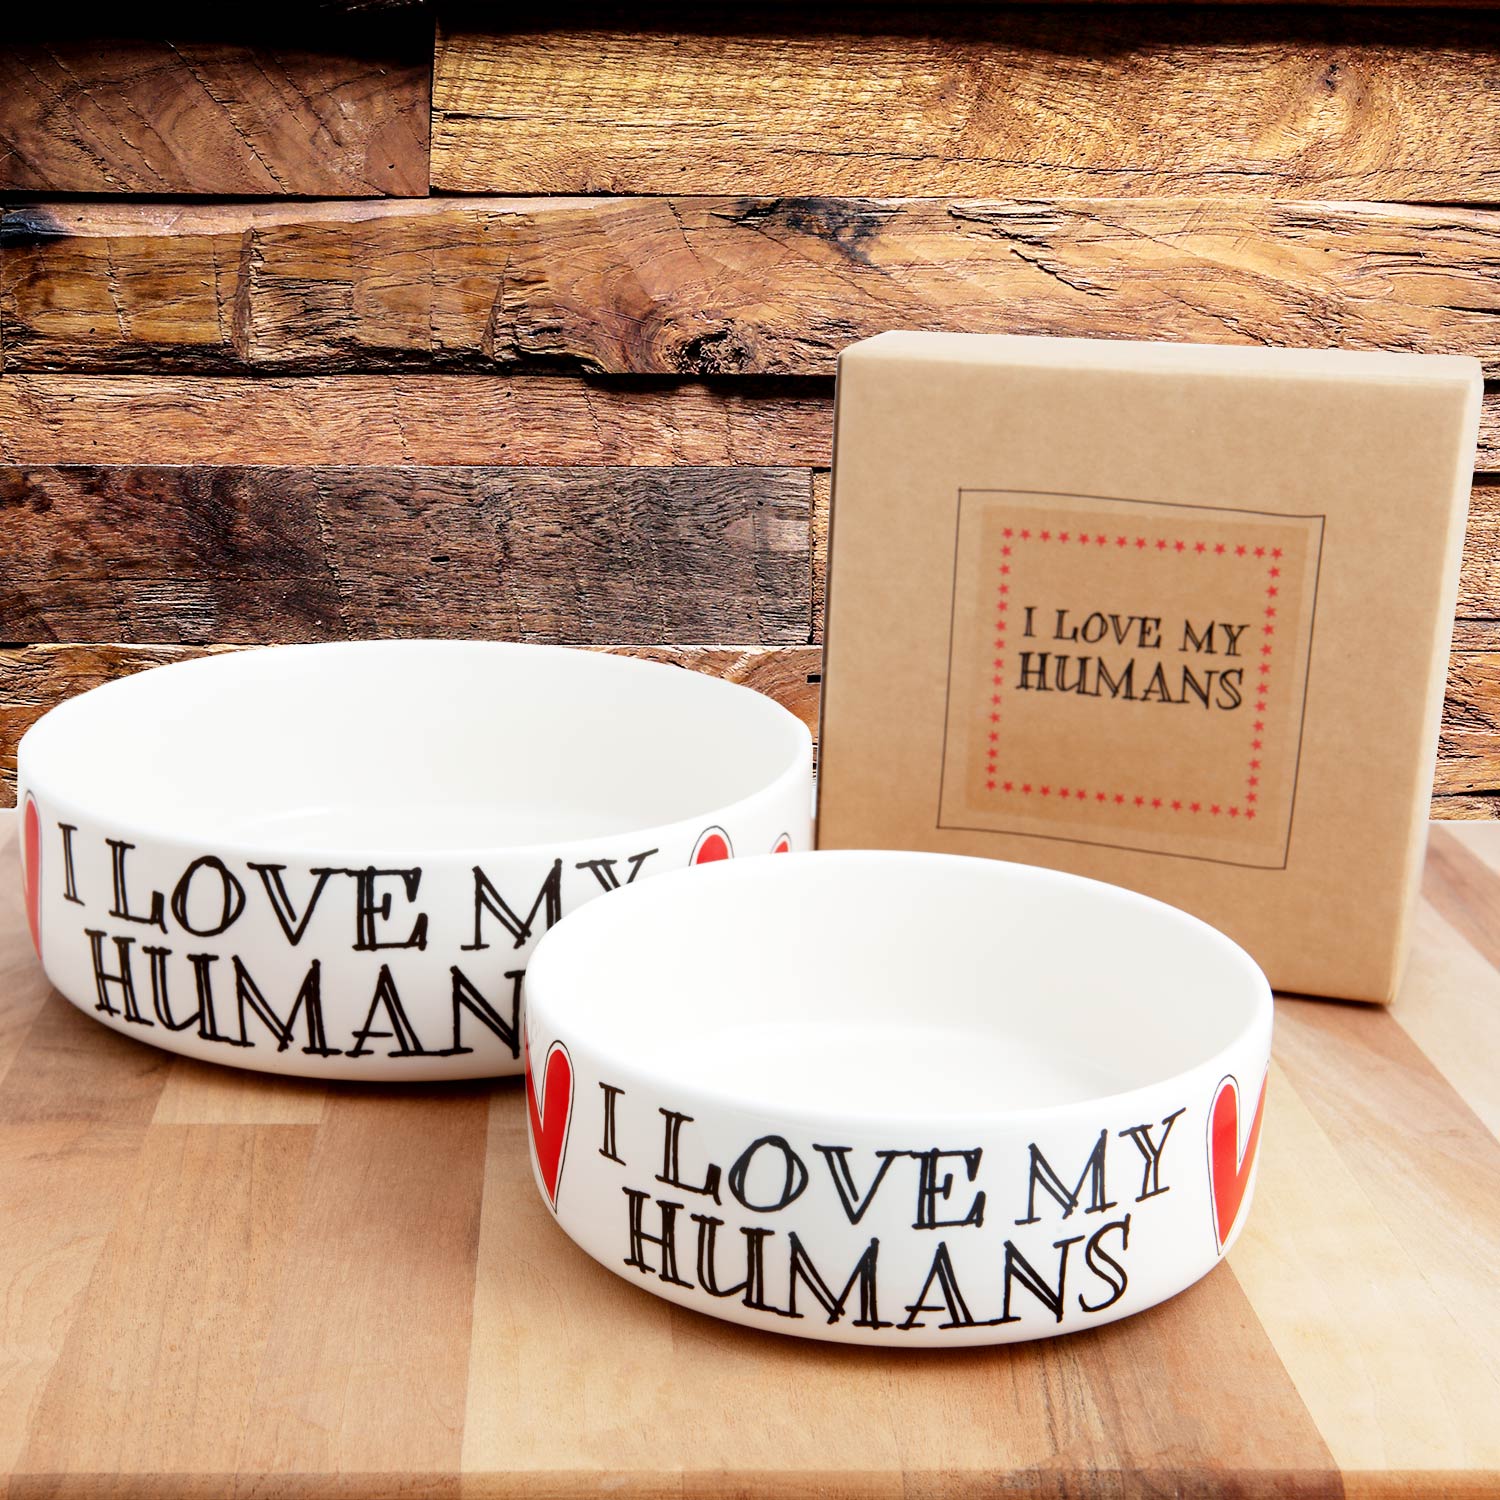 Dog Lover Gifts available at Dog Krazy Gifts – I Love My Humans earthenware dog bowl in 2 sizes - part of the Sweet William Designs range available from DogKrazyGifts.co.uk